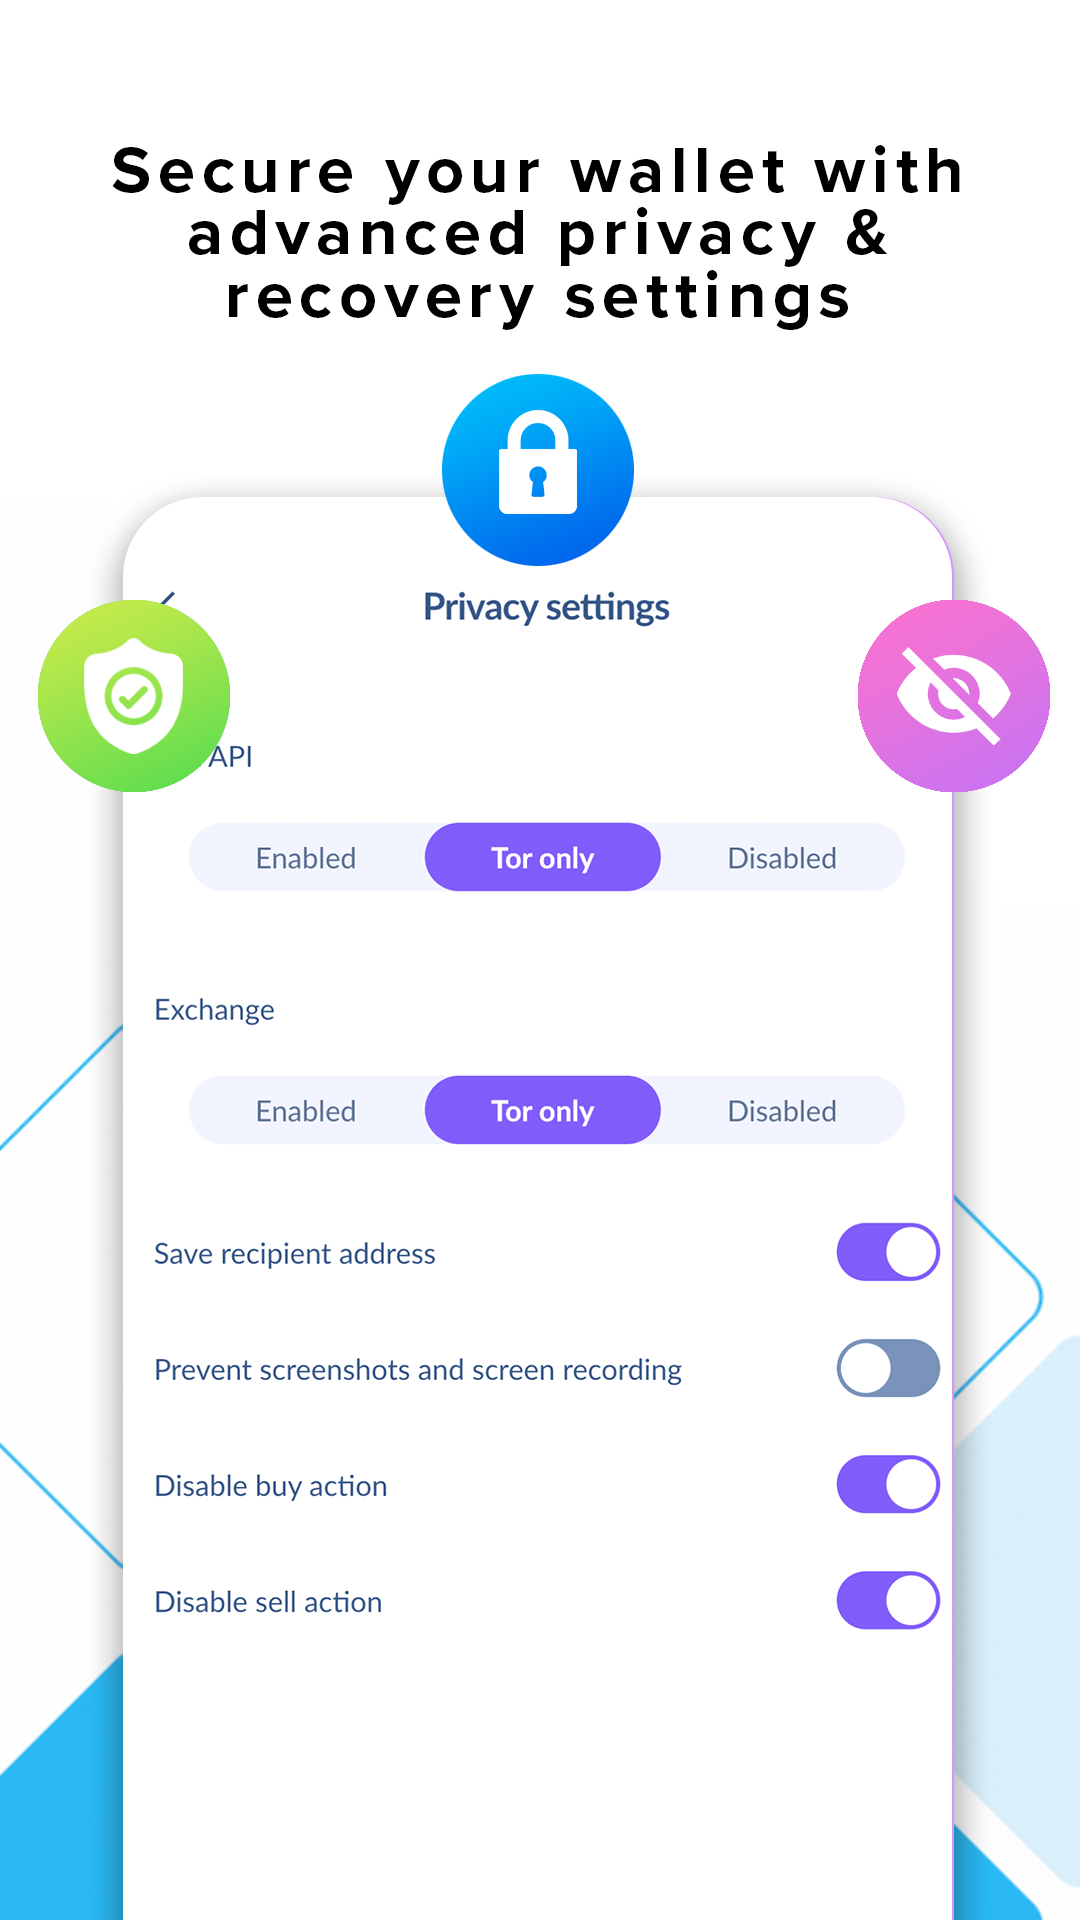 Securely store, send and exchange your crypto with ease.